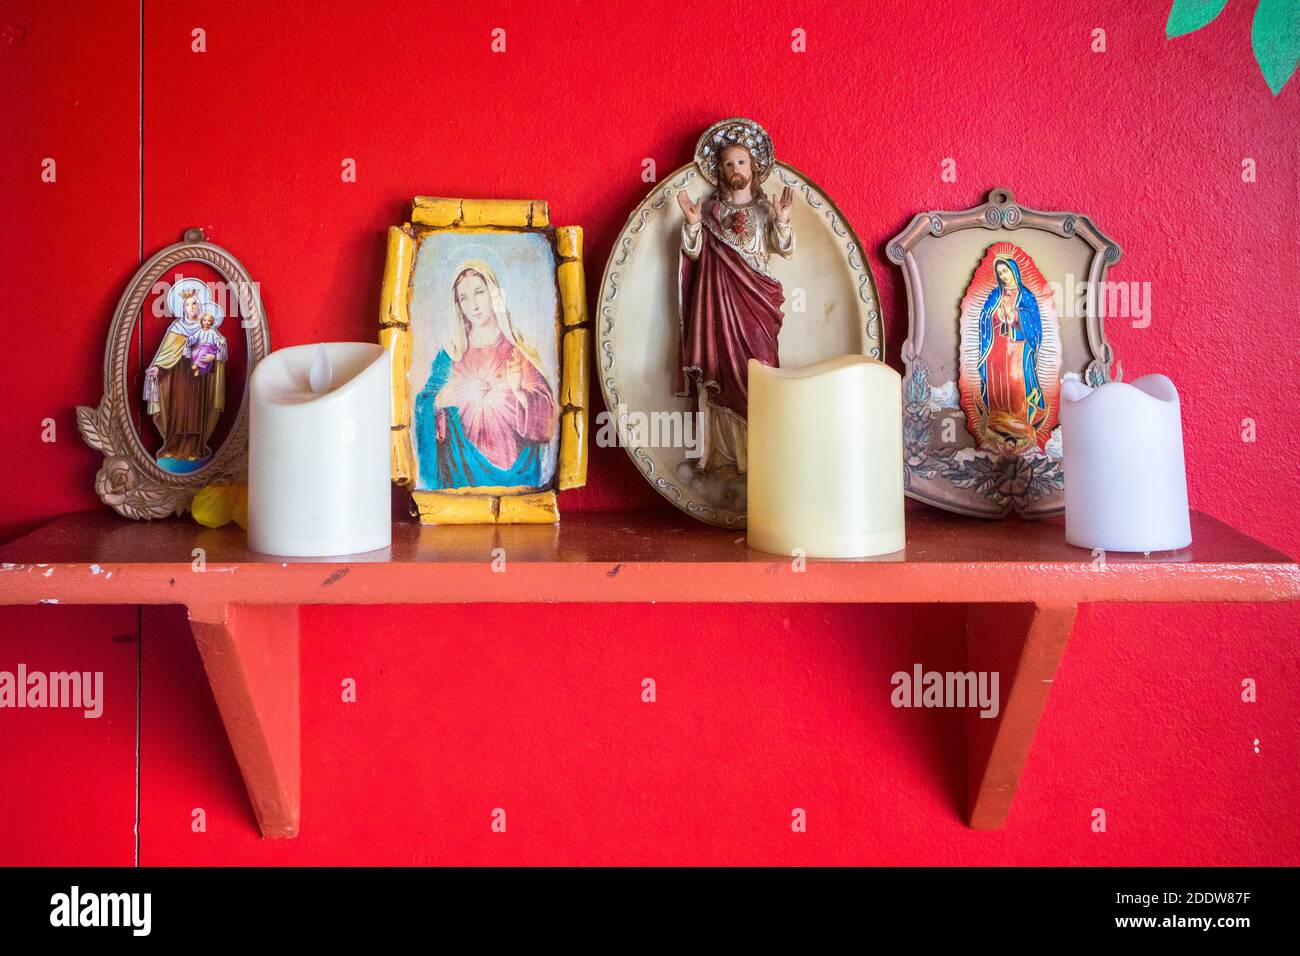 An altar with catholic icons in Cebu, Philippines Stock Photo